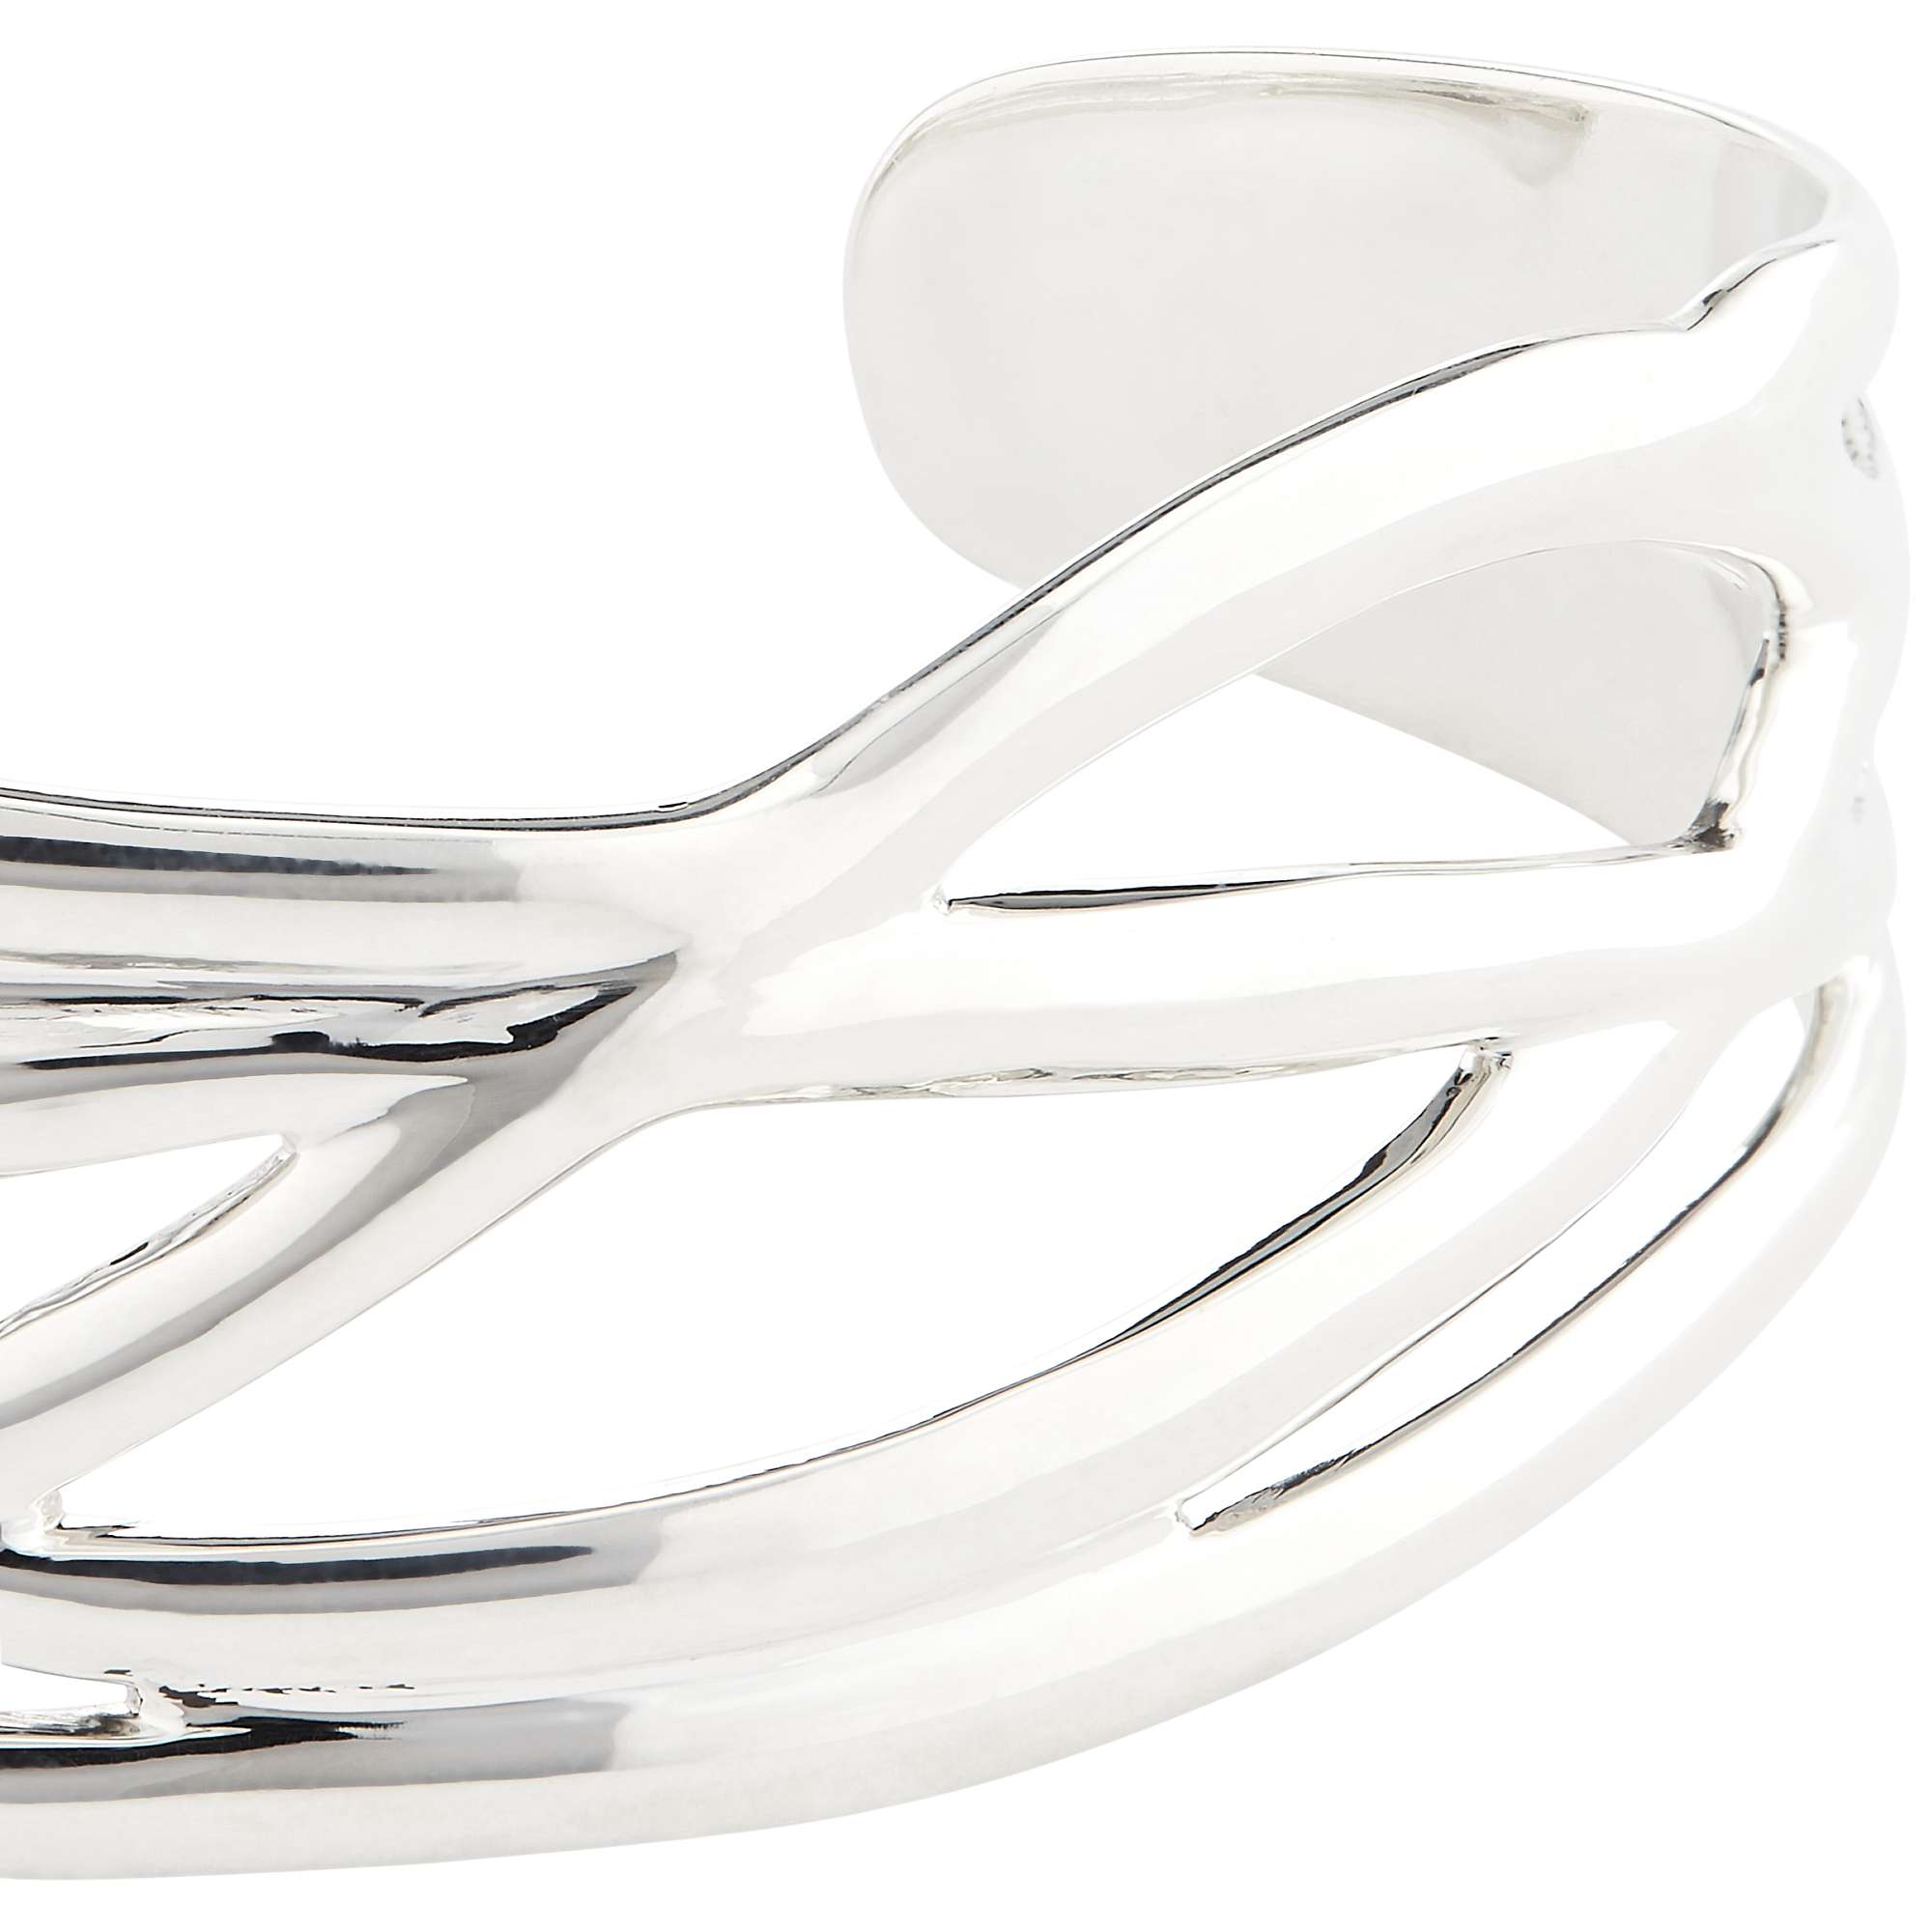 Buy Andea Sterling Silver Plait Cuff, Silver Online at johnlewis.com